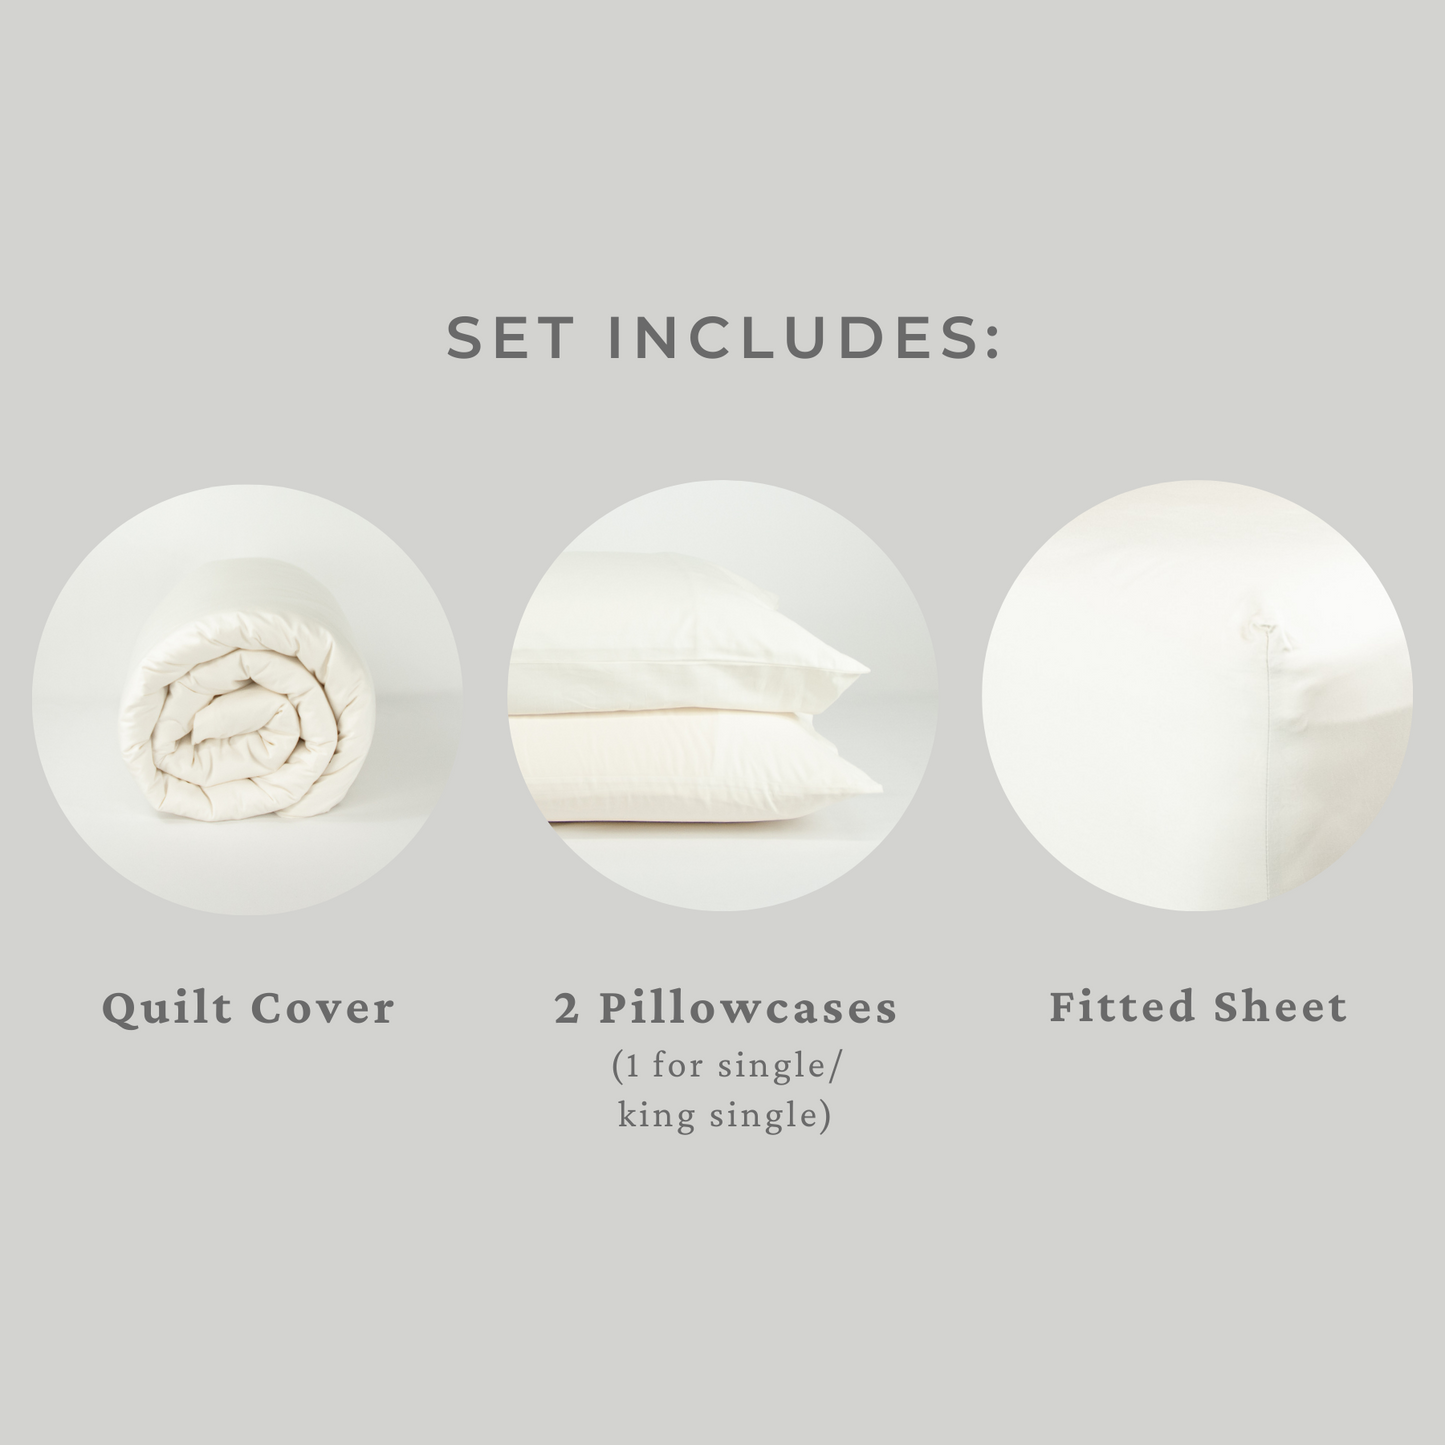 Set includes: Quilt cover and two pillowcases (1 for single or king single)